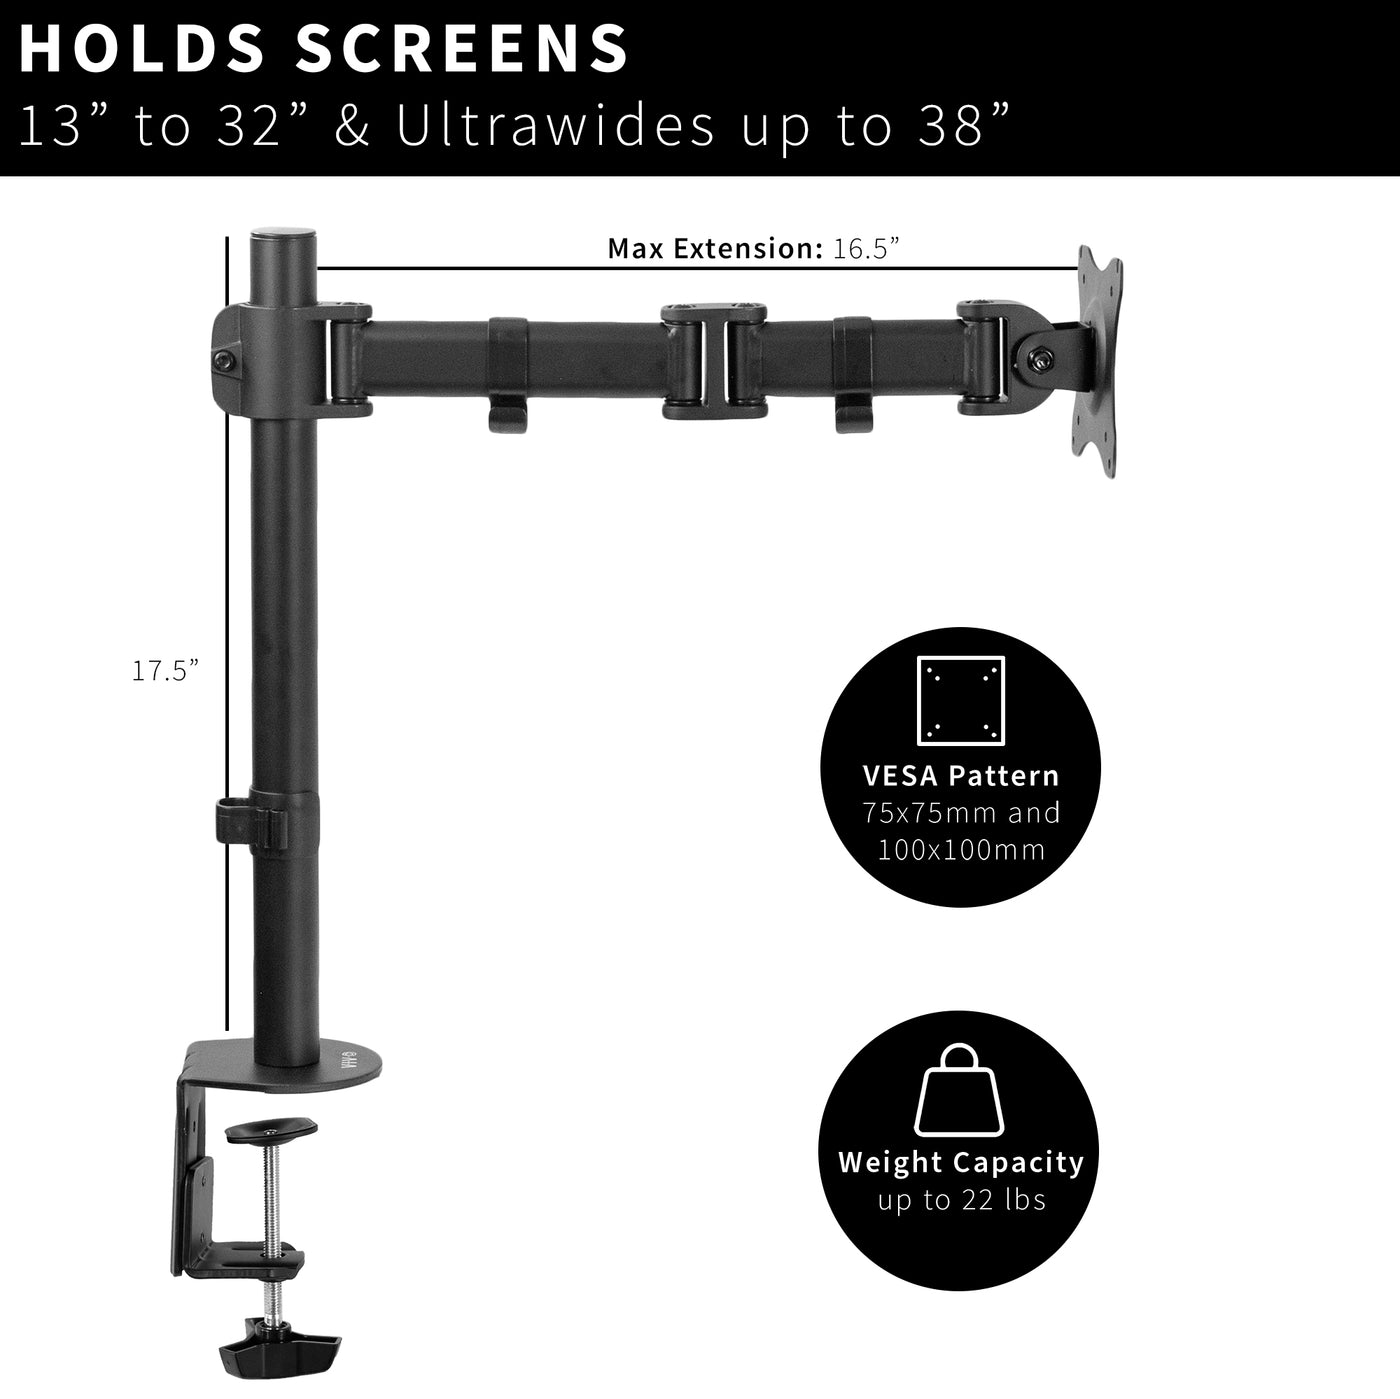 Securely support your screen with a solidly constructed frame.